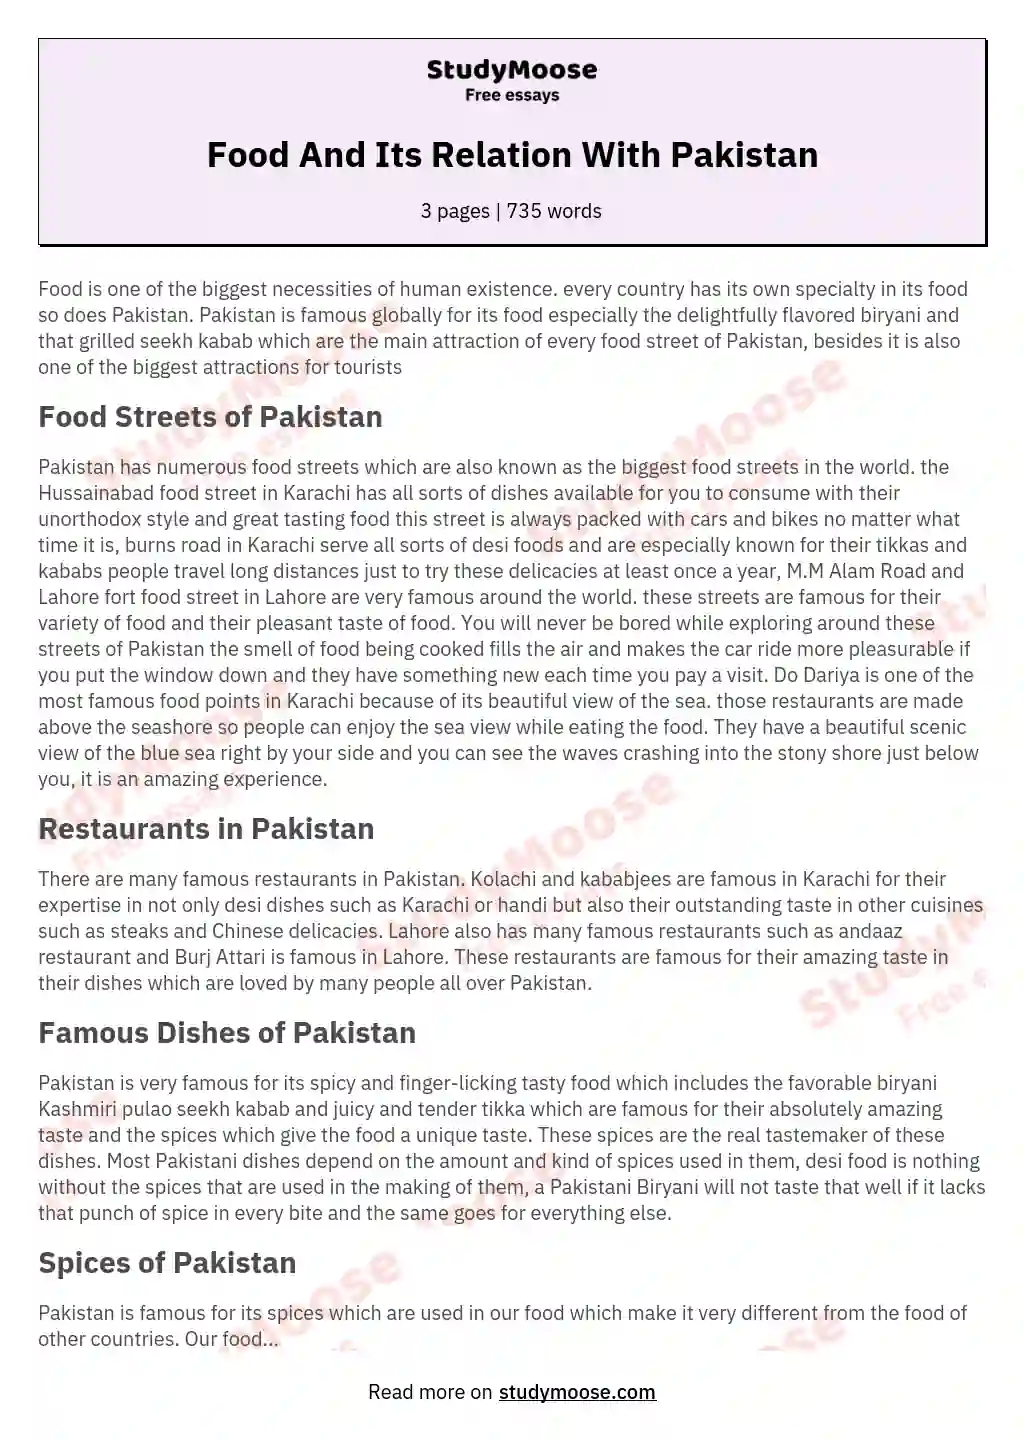 Food And Its Relation With Pakistan